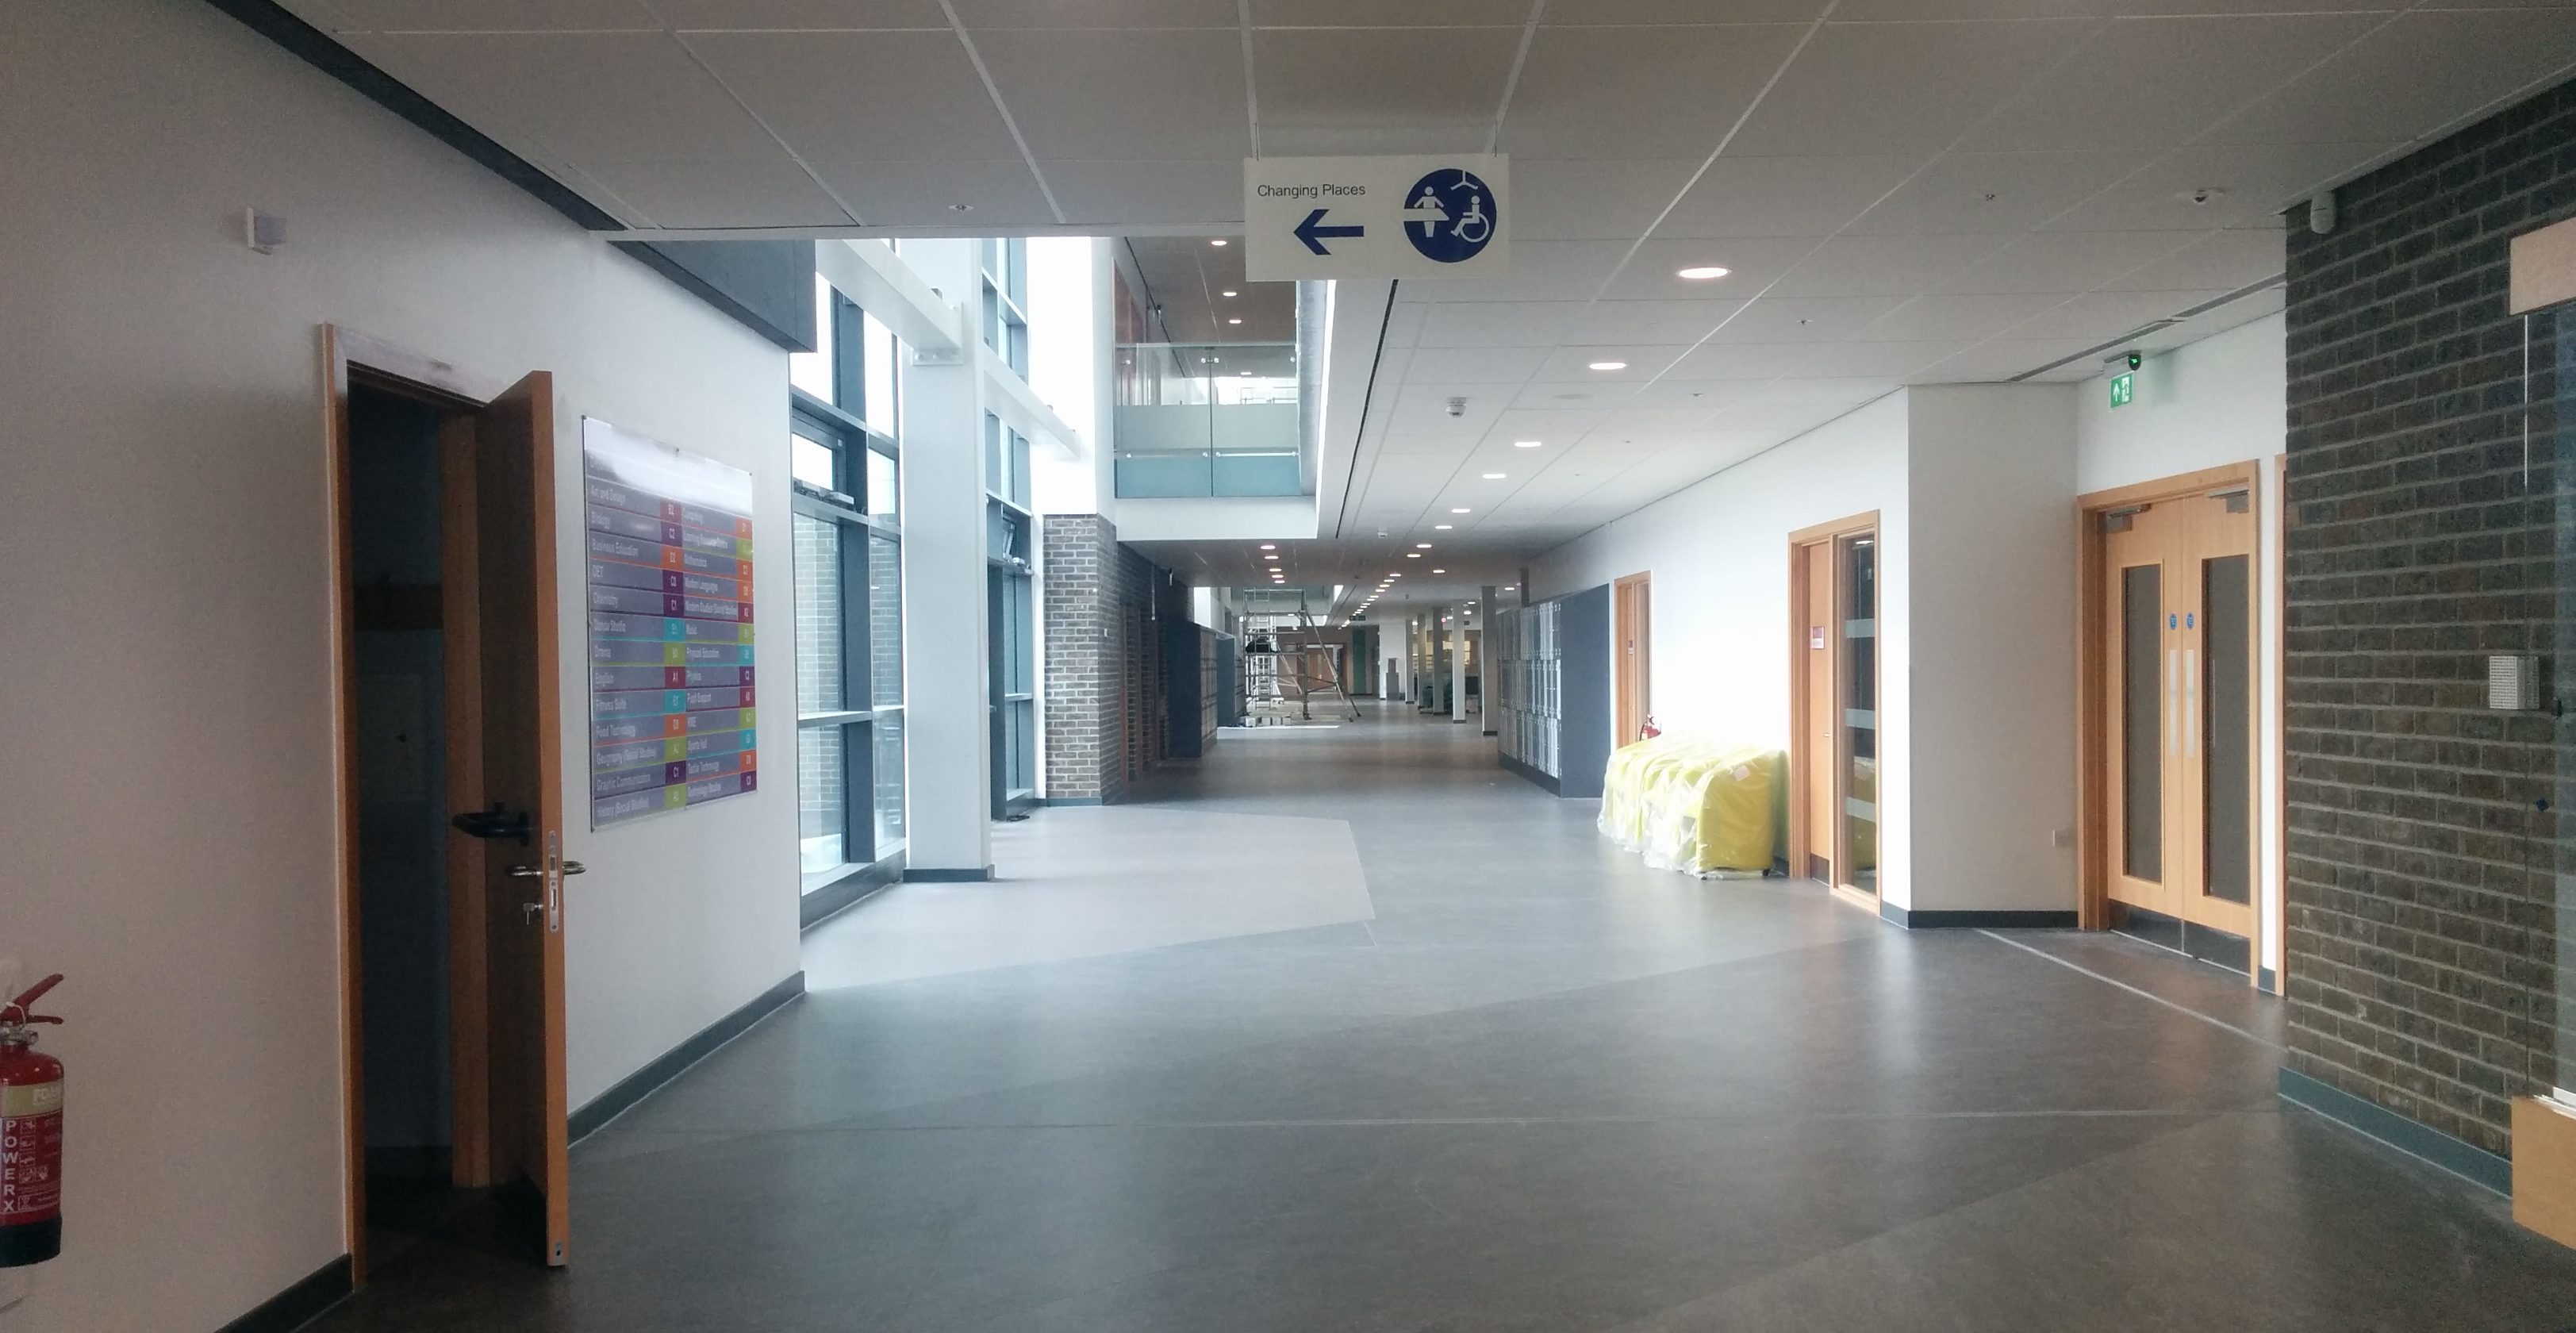 The impressive entrance to the new £44 million Levenmouth Academy.